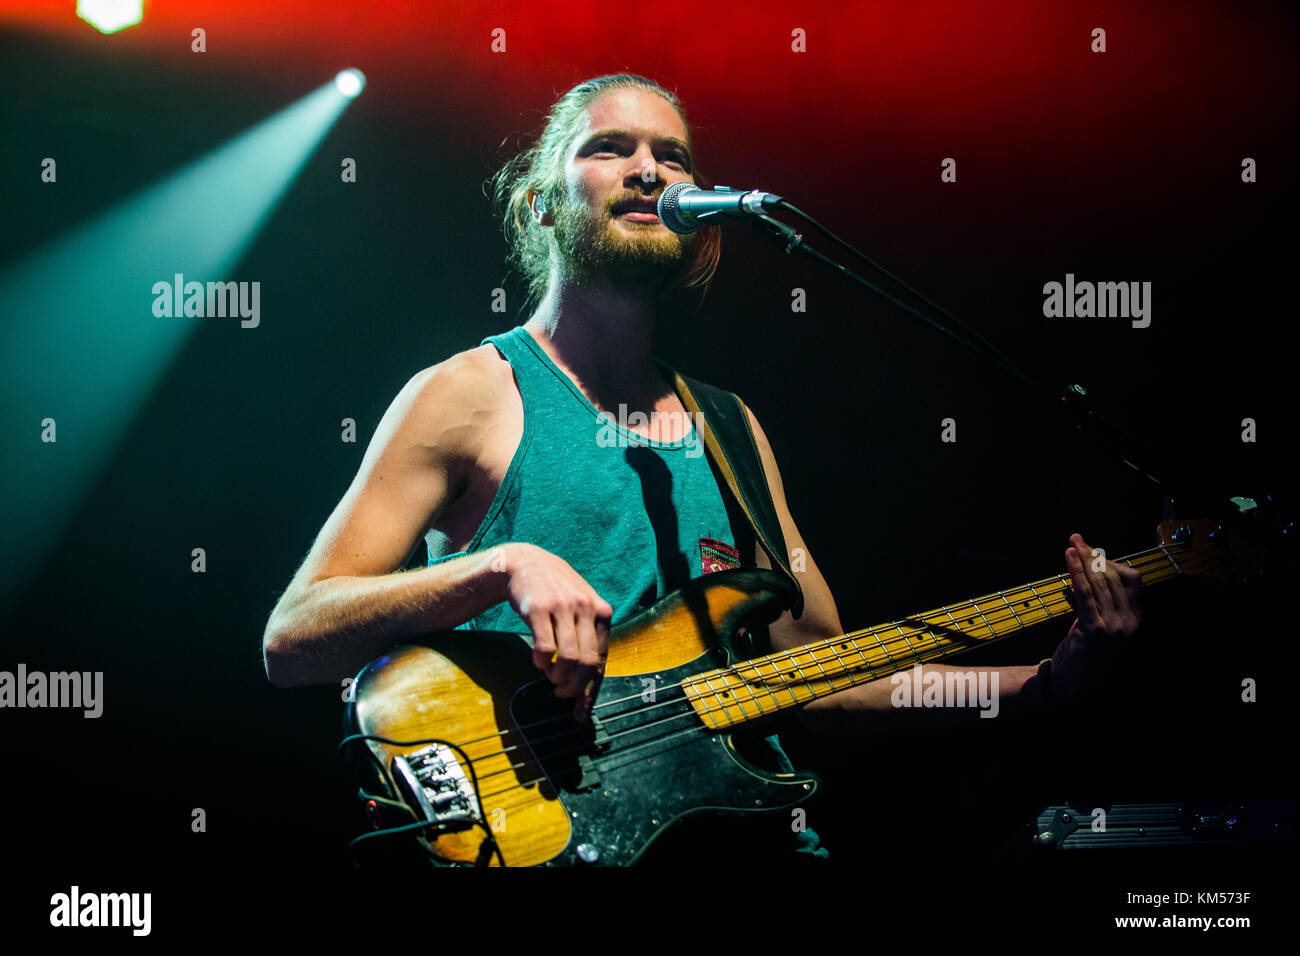 The German singer-songwriter and musician Joris Buchholz is best known just as Joris and here performs a live concert at the German music festival Traumzeit Festival 2015 in Duisburg. Here live band member Tobias Voges on bass is pictured live on stage. Germany, 20/06 2015. Stock Photo